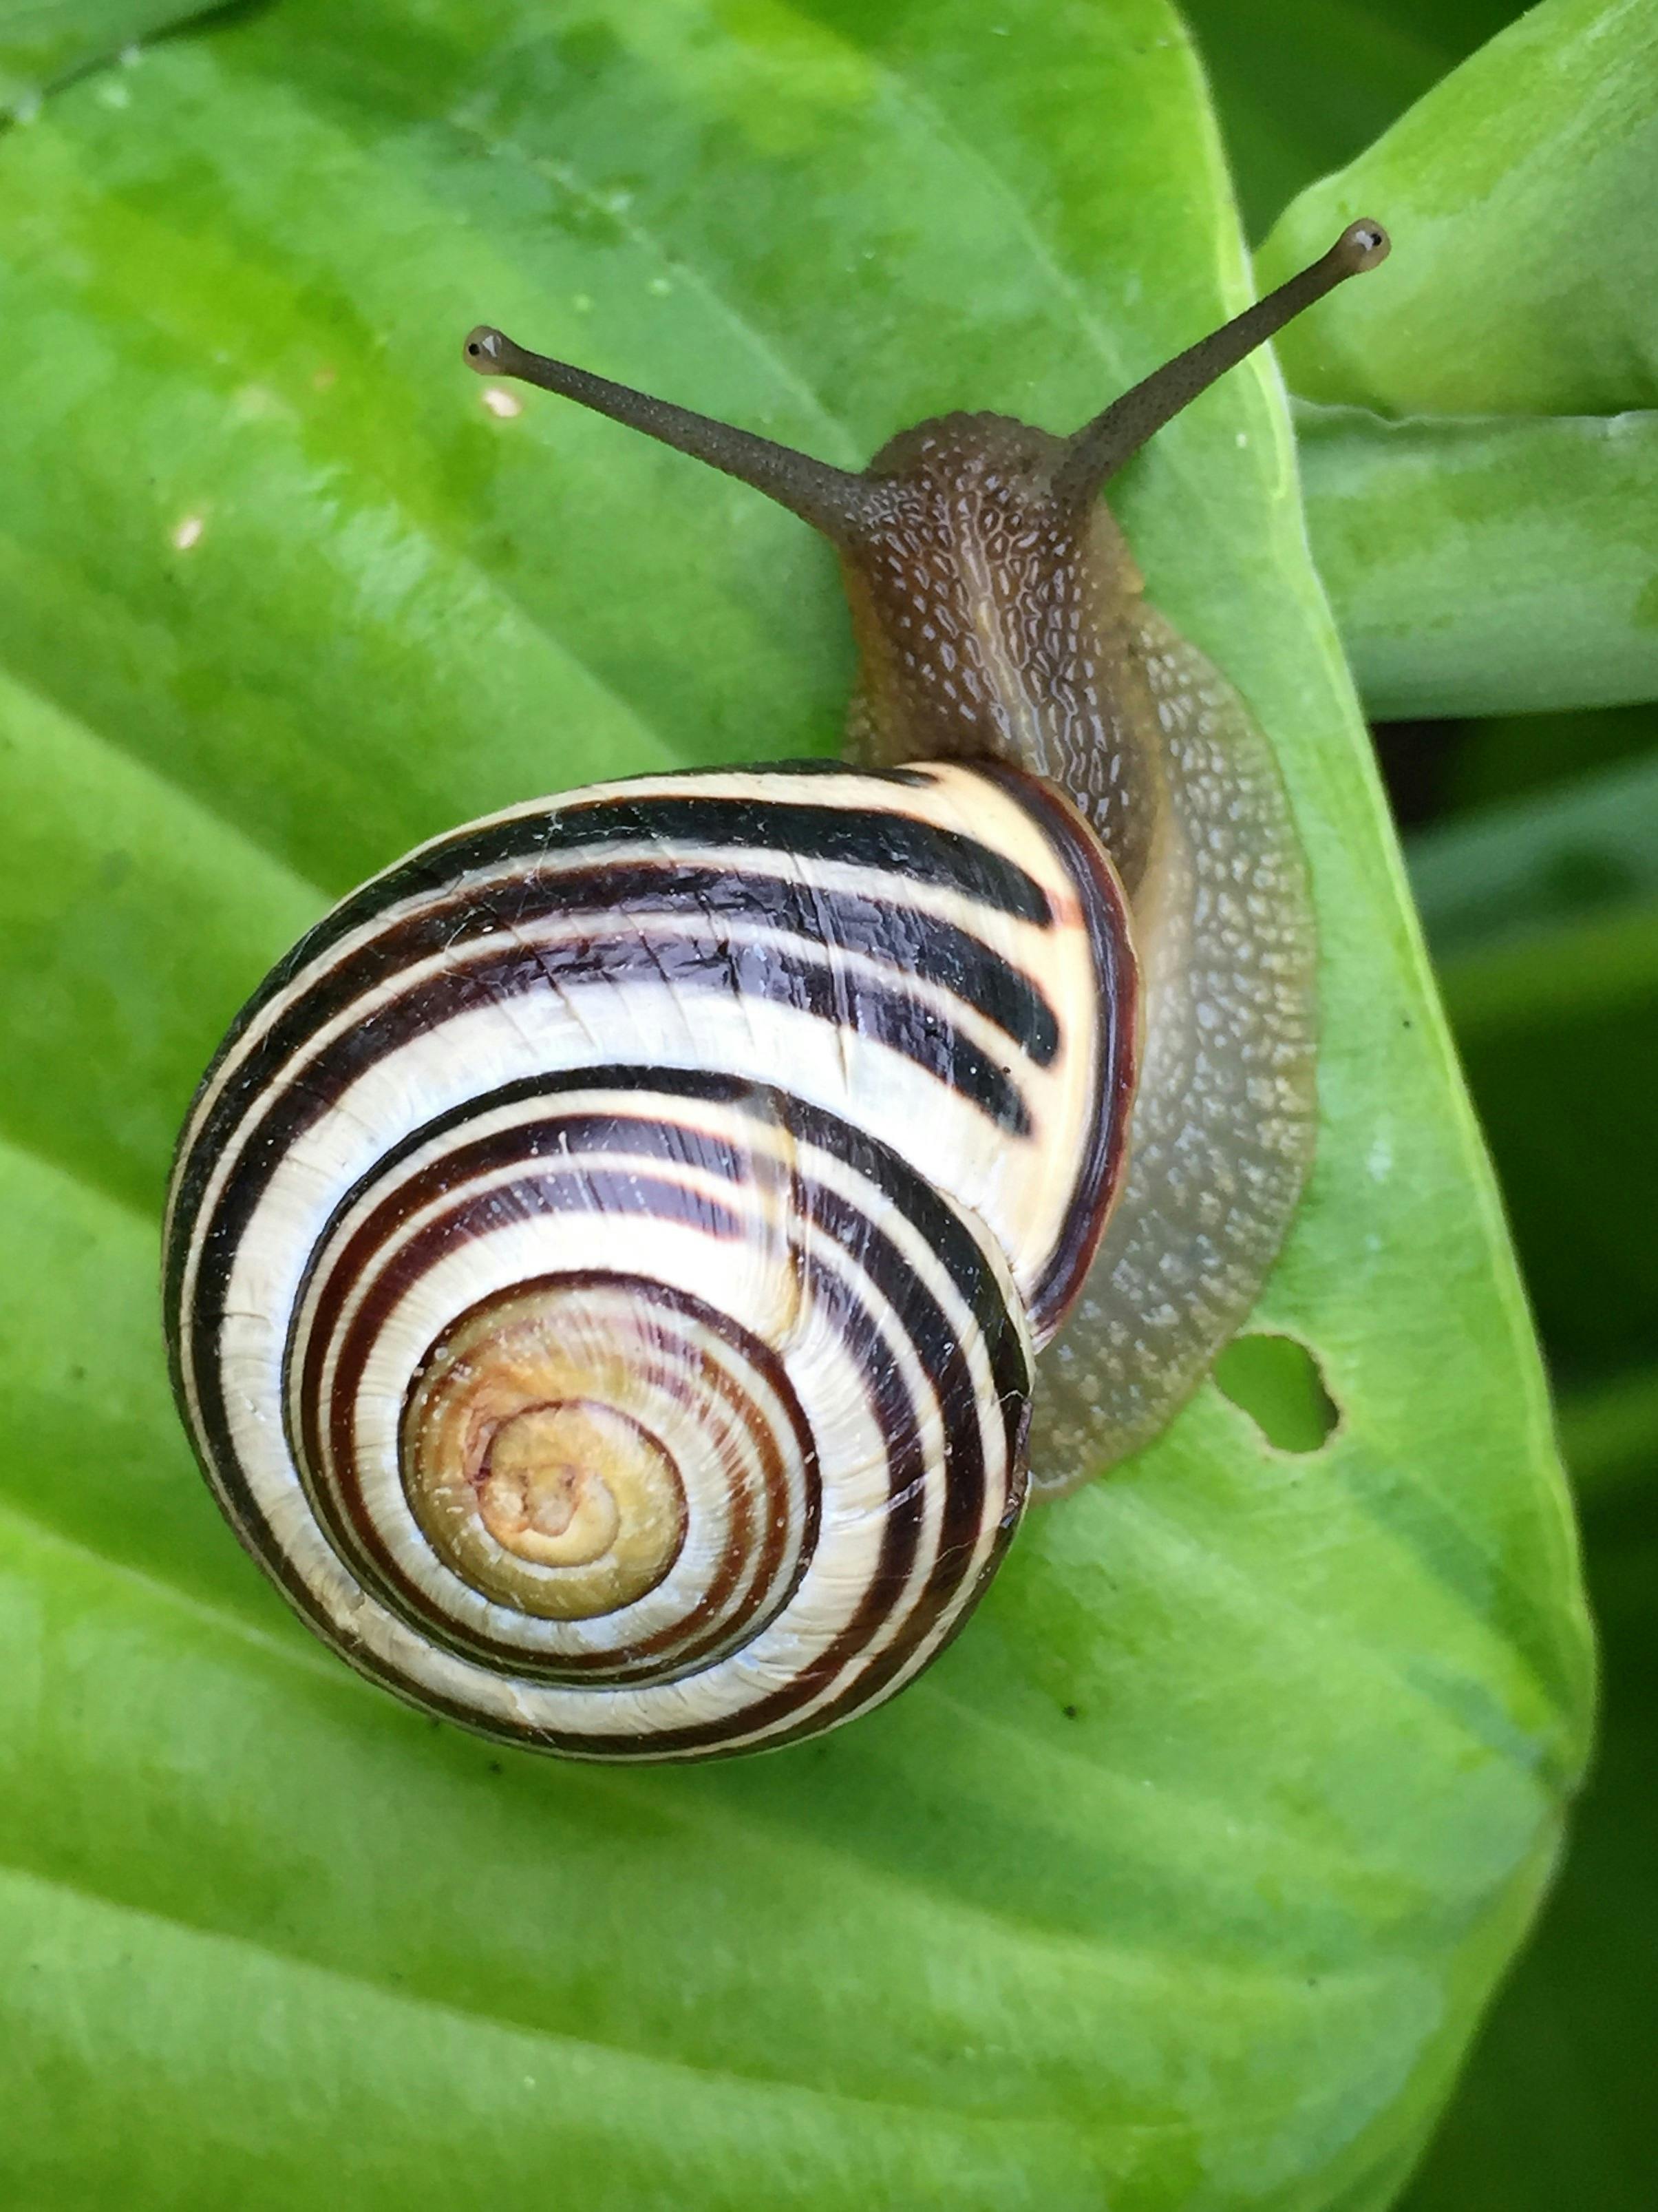 White Black and Brown Snail on Green Leaf